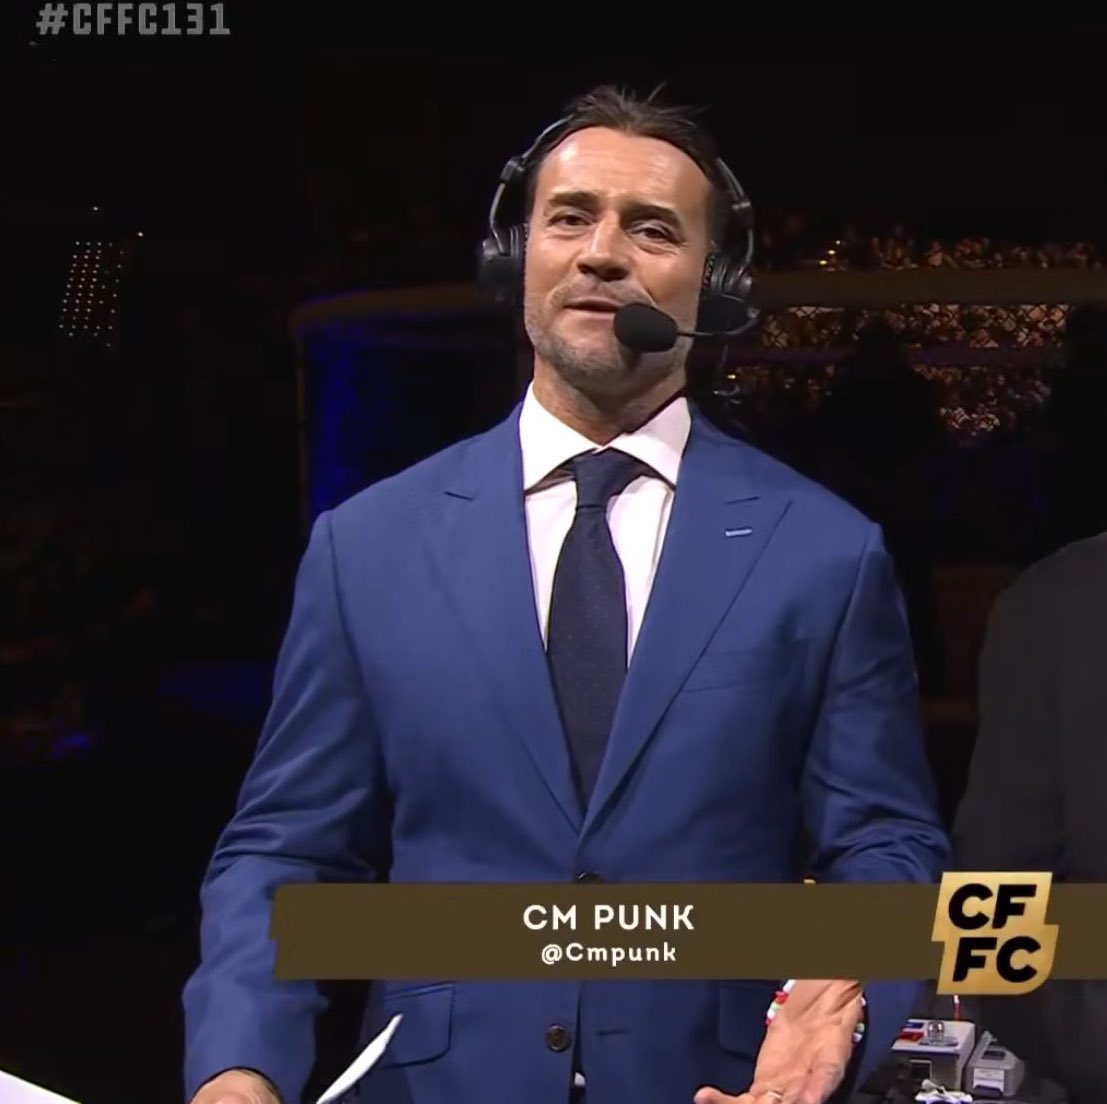 CM Punk was a part of 4 promotions in the same week.
- WWE
- AEW
- NJPW
- CFFC
WHAT A BEAST🔥